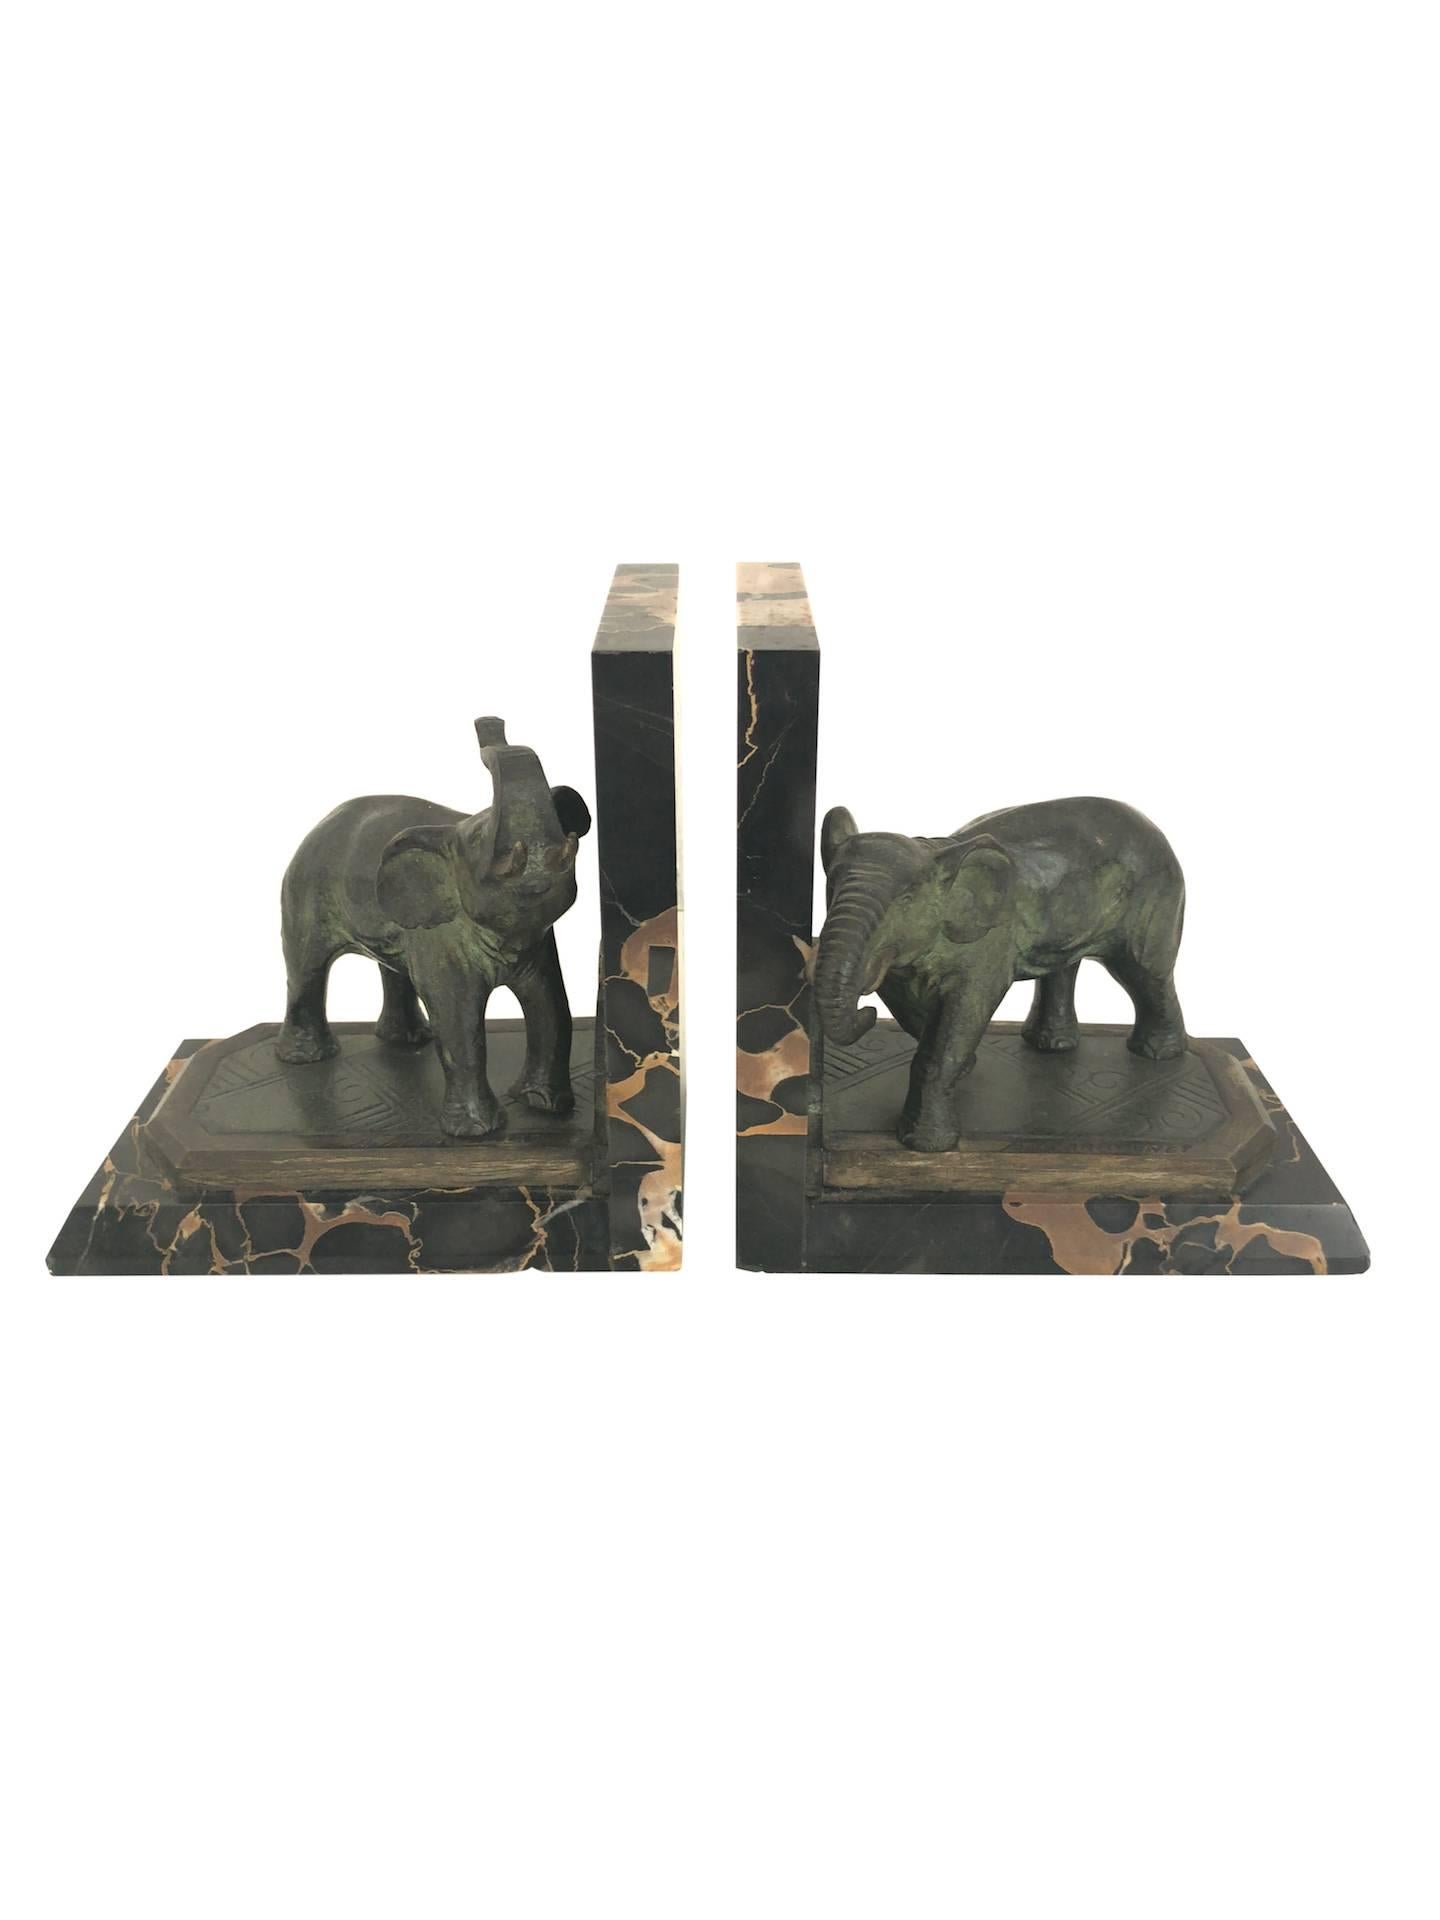 Bookends with elephants in two different poses
By Albert Marionnet (1852-1910), signed
France, circa 1900.

Material:
– Bronze, original patina
– Portor-marble socle 

Dimensions: 
Width 14.5 cm 
Height 14.5 cm 
Depth 9.5 cm.